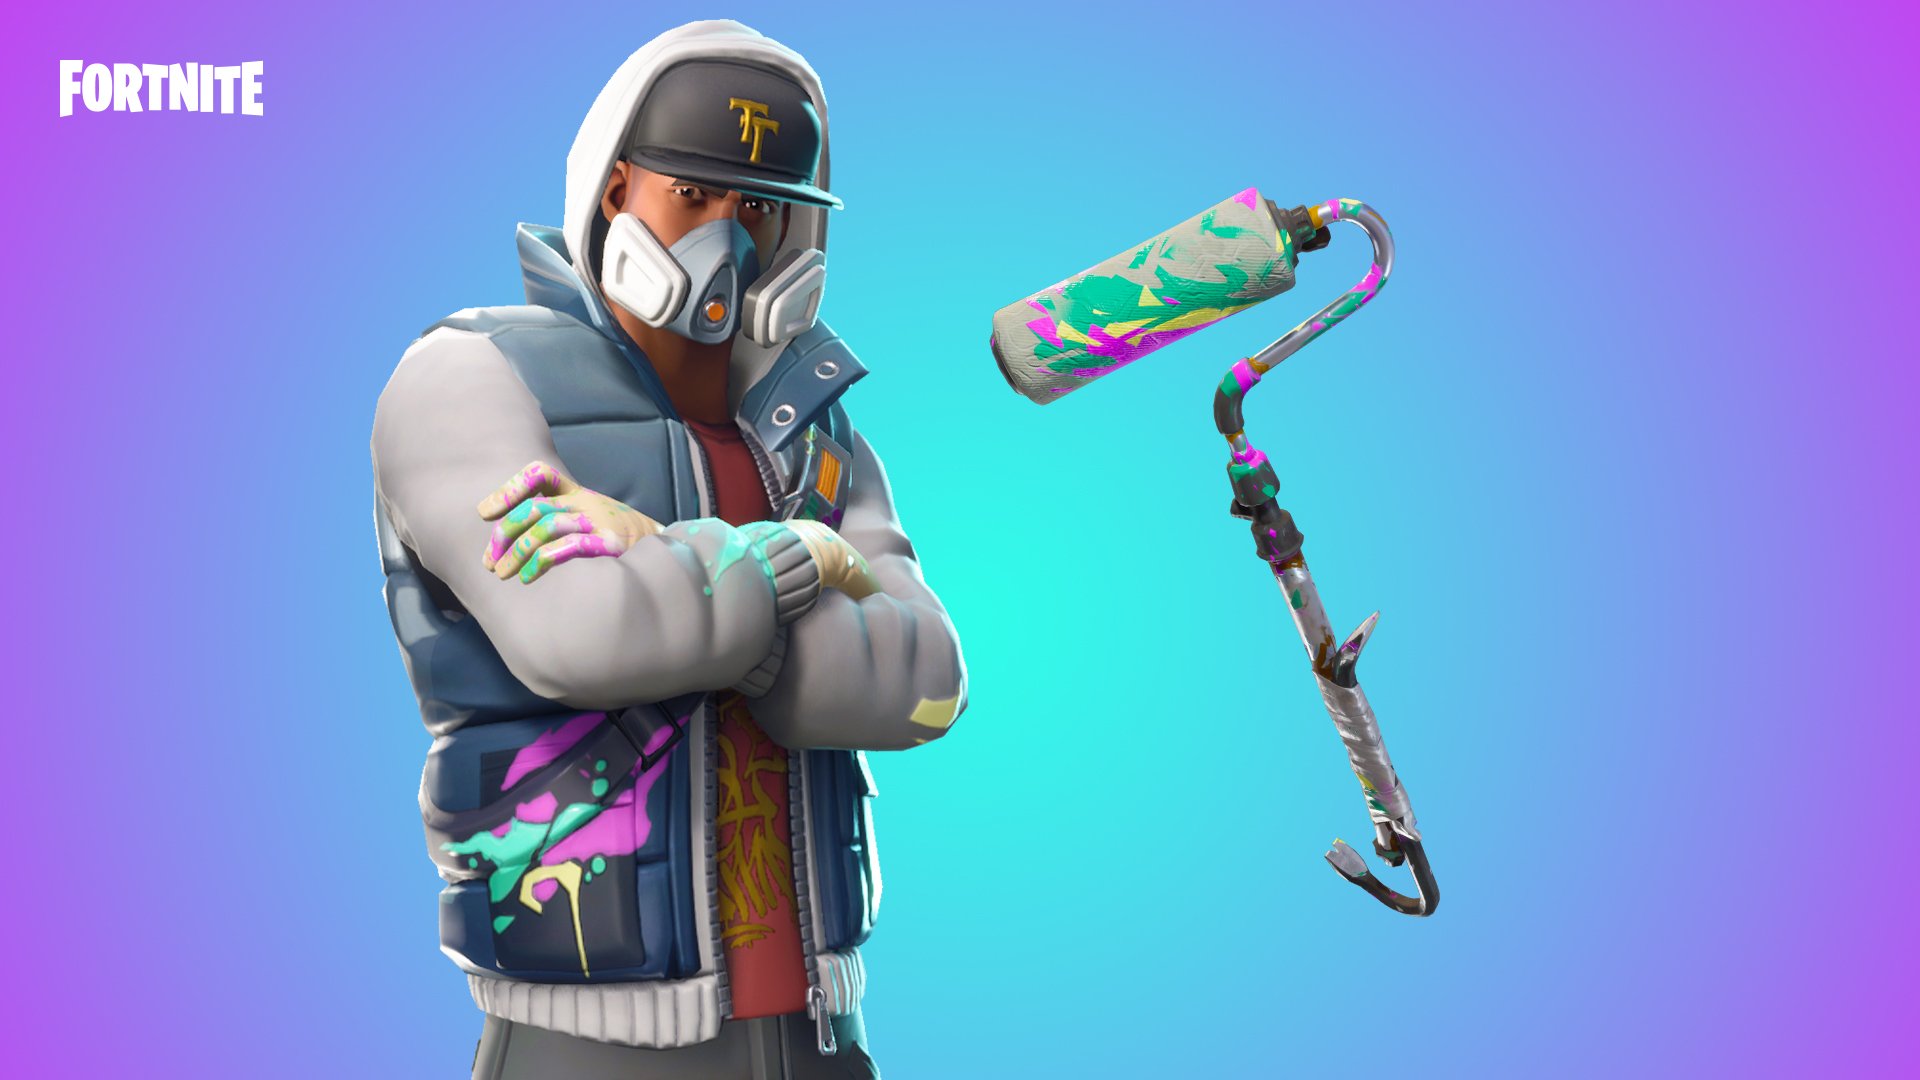 Fortnite on Twitter: "Roll out in style! The new Abstrakt ...